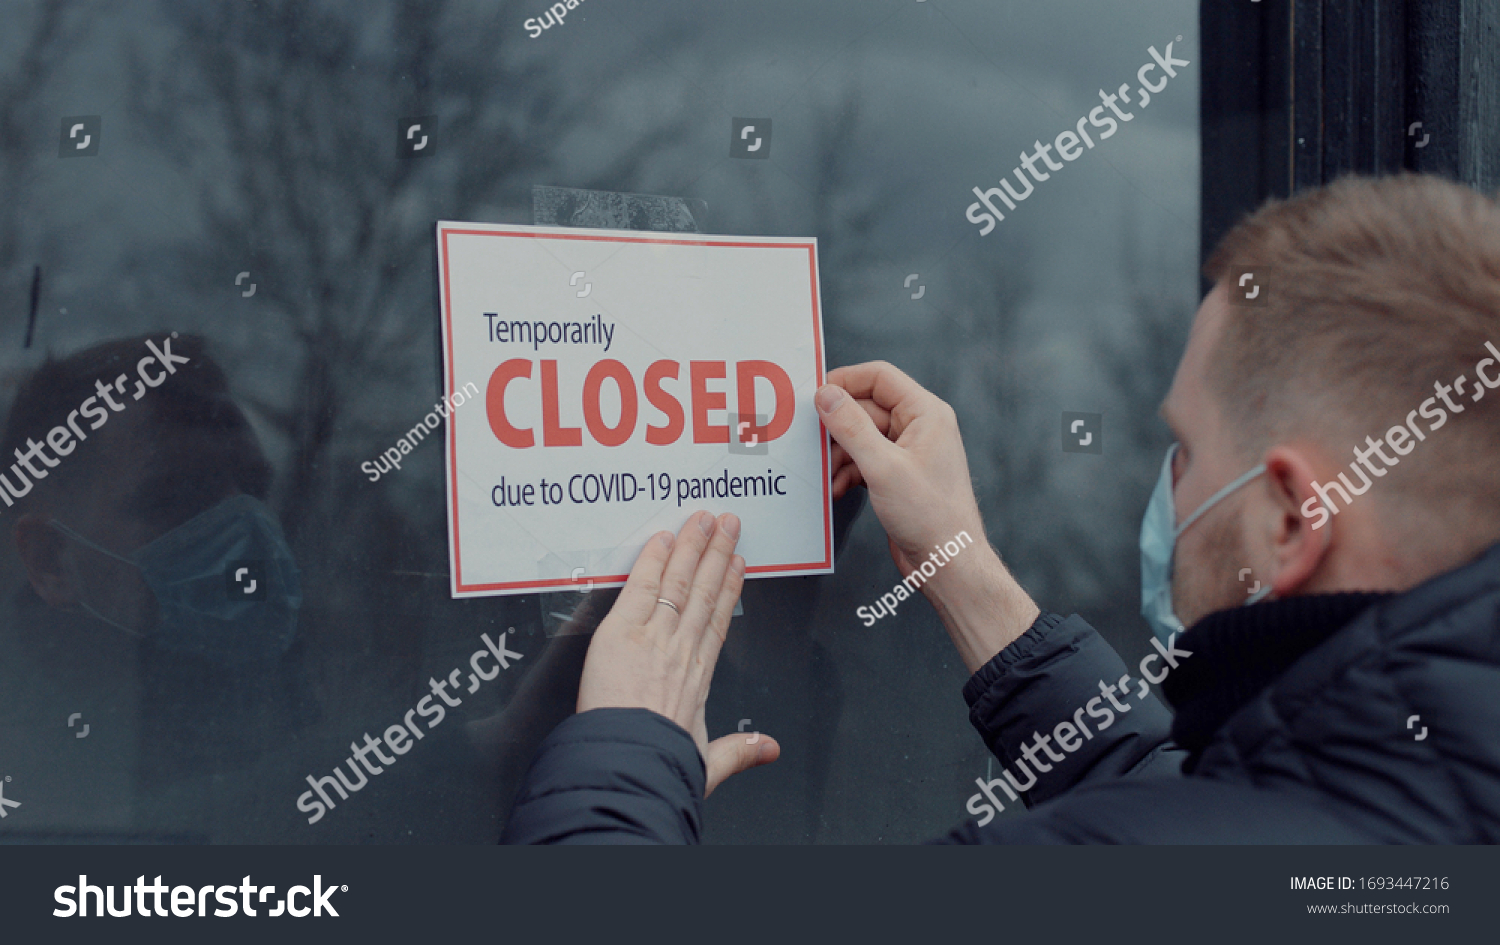 Caucasian male wearing medical mask puts a Temporary closed due COVID-19 pandemic sign on a window. Coronavirus pandemic, small business shutdown #1693447216